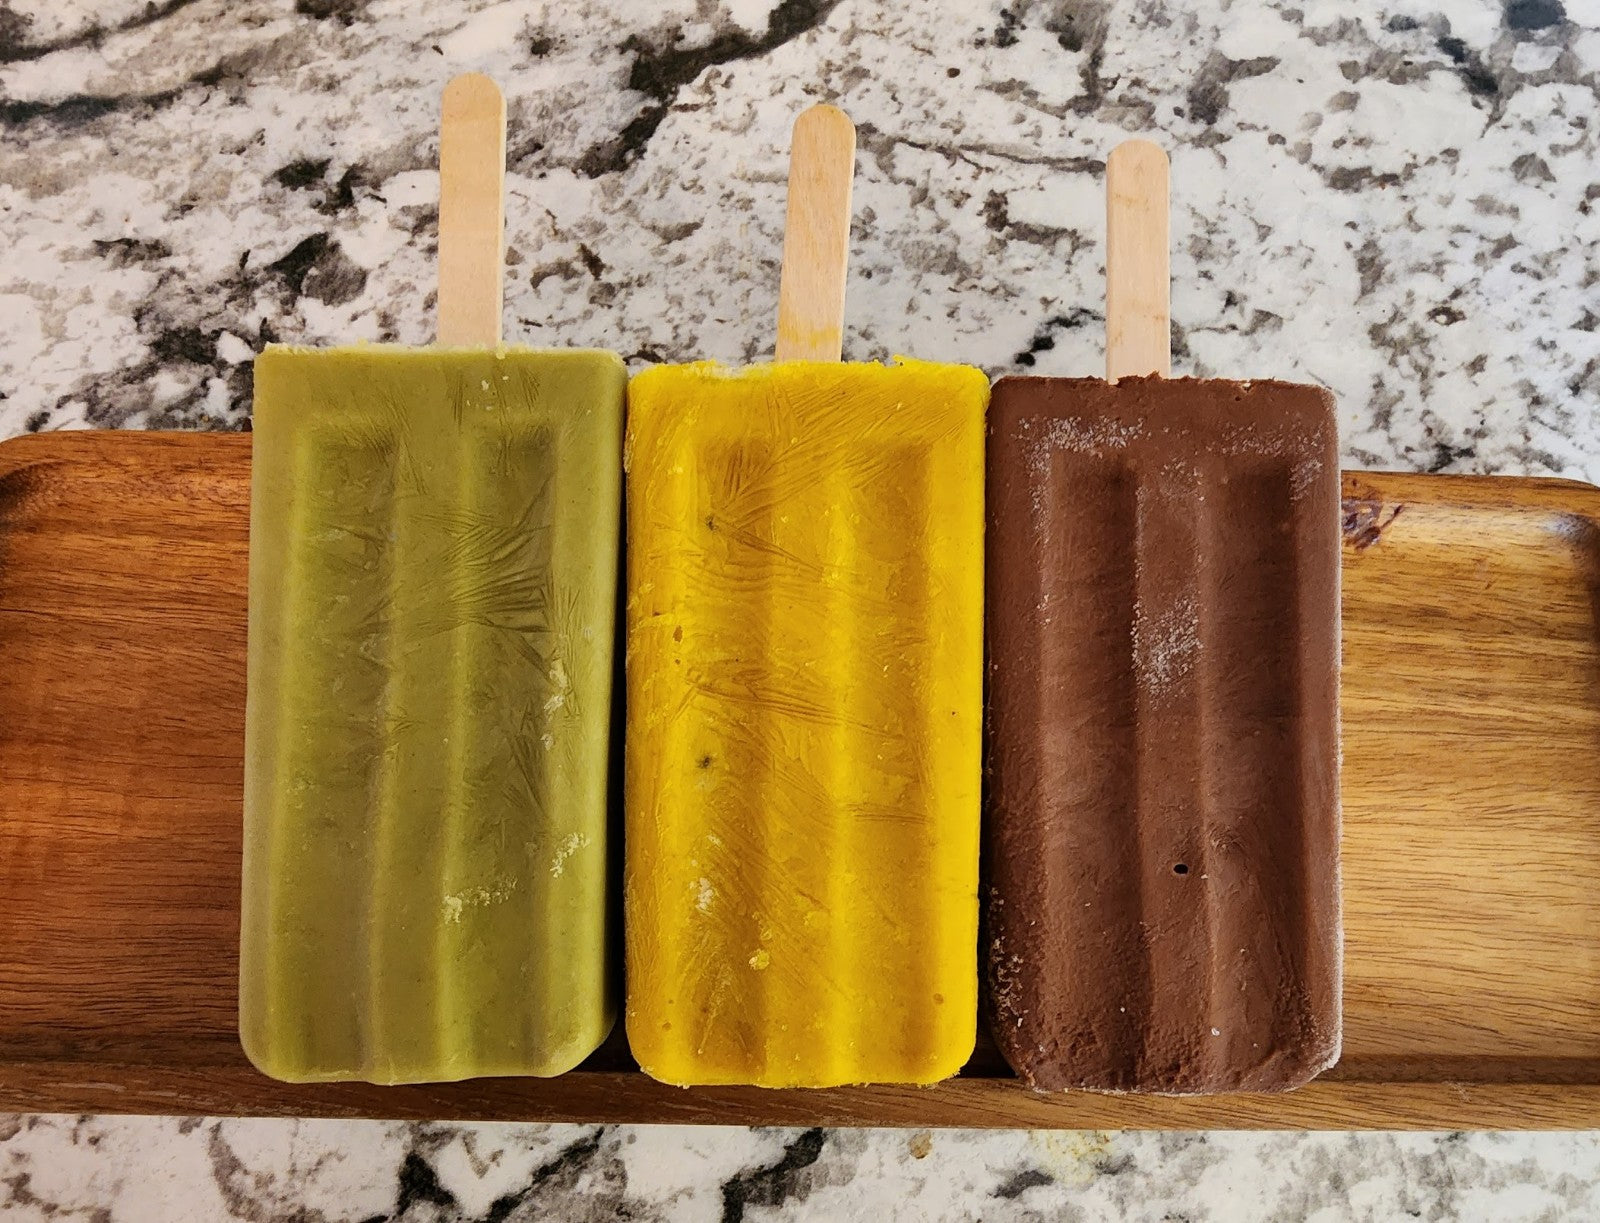 green matcha popsicle on left, golden milk popsicle in the center, and fudge popsicle on the right